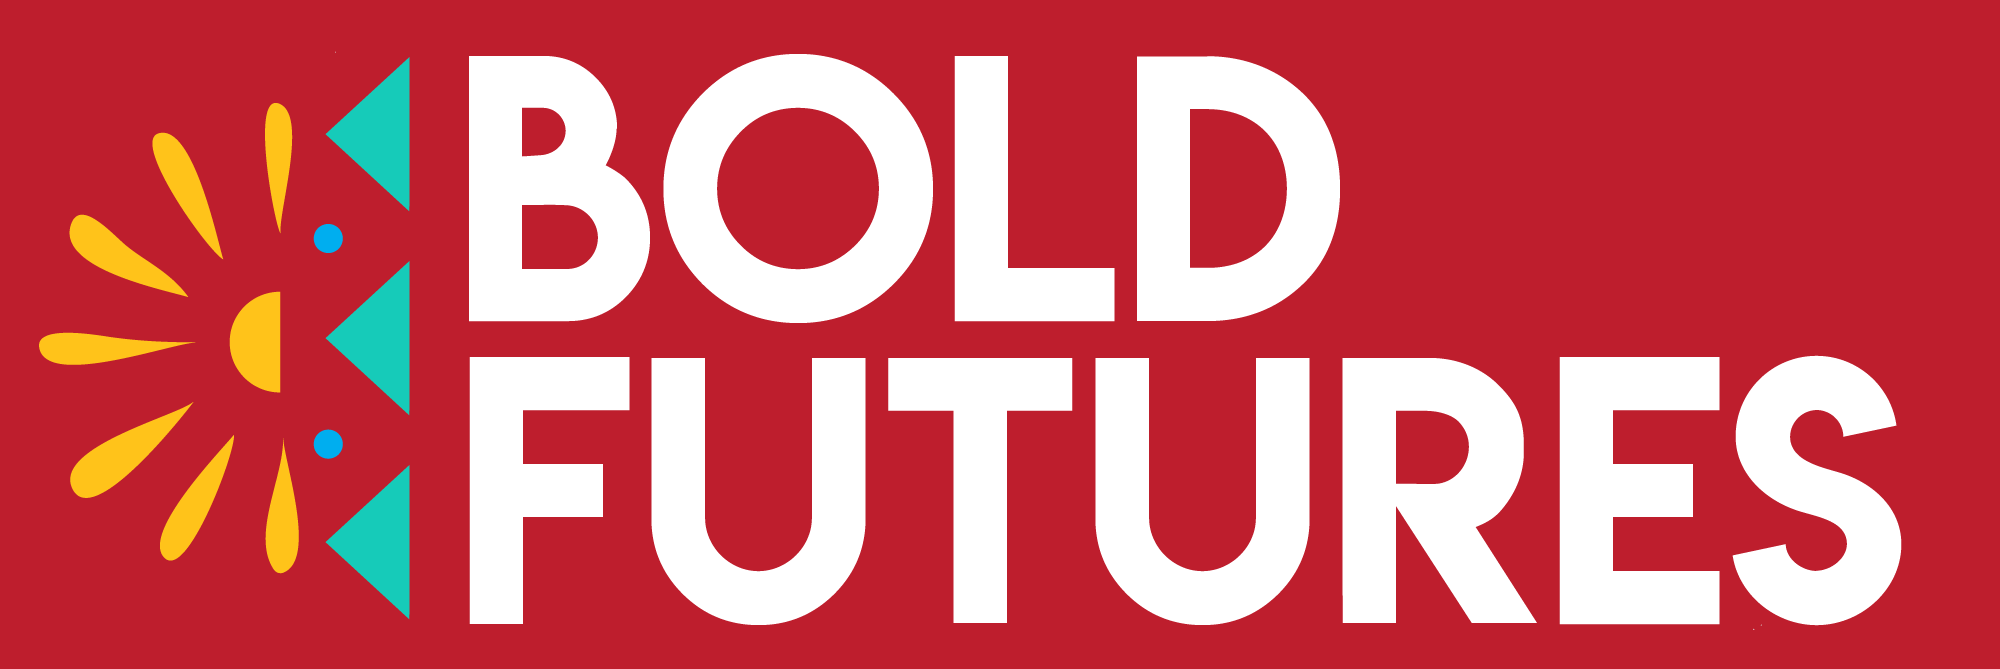 Red Bold Futures Logo with white text and yellow sunburst